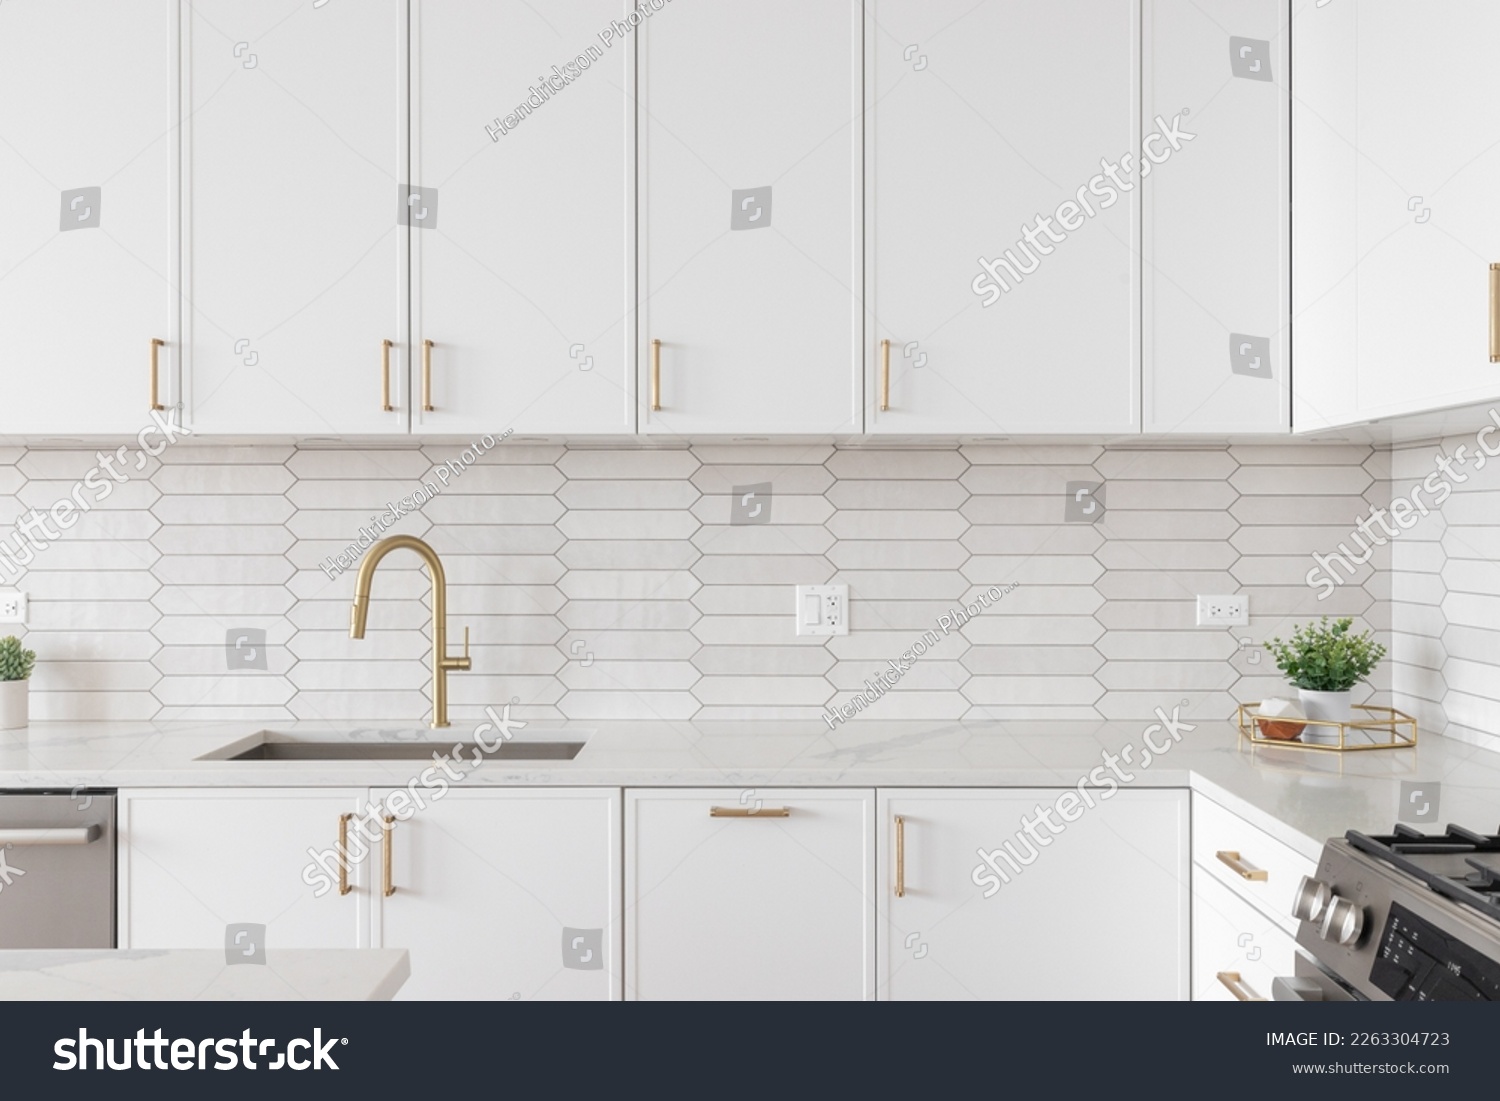 A beautiful kitchen faucet detail with white cabinets, a gold faucet, white marble countertops, and a brown picket ceramic tile backsplash. #2263304723